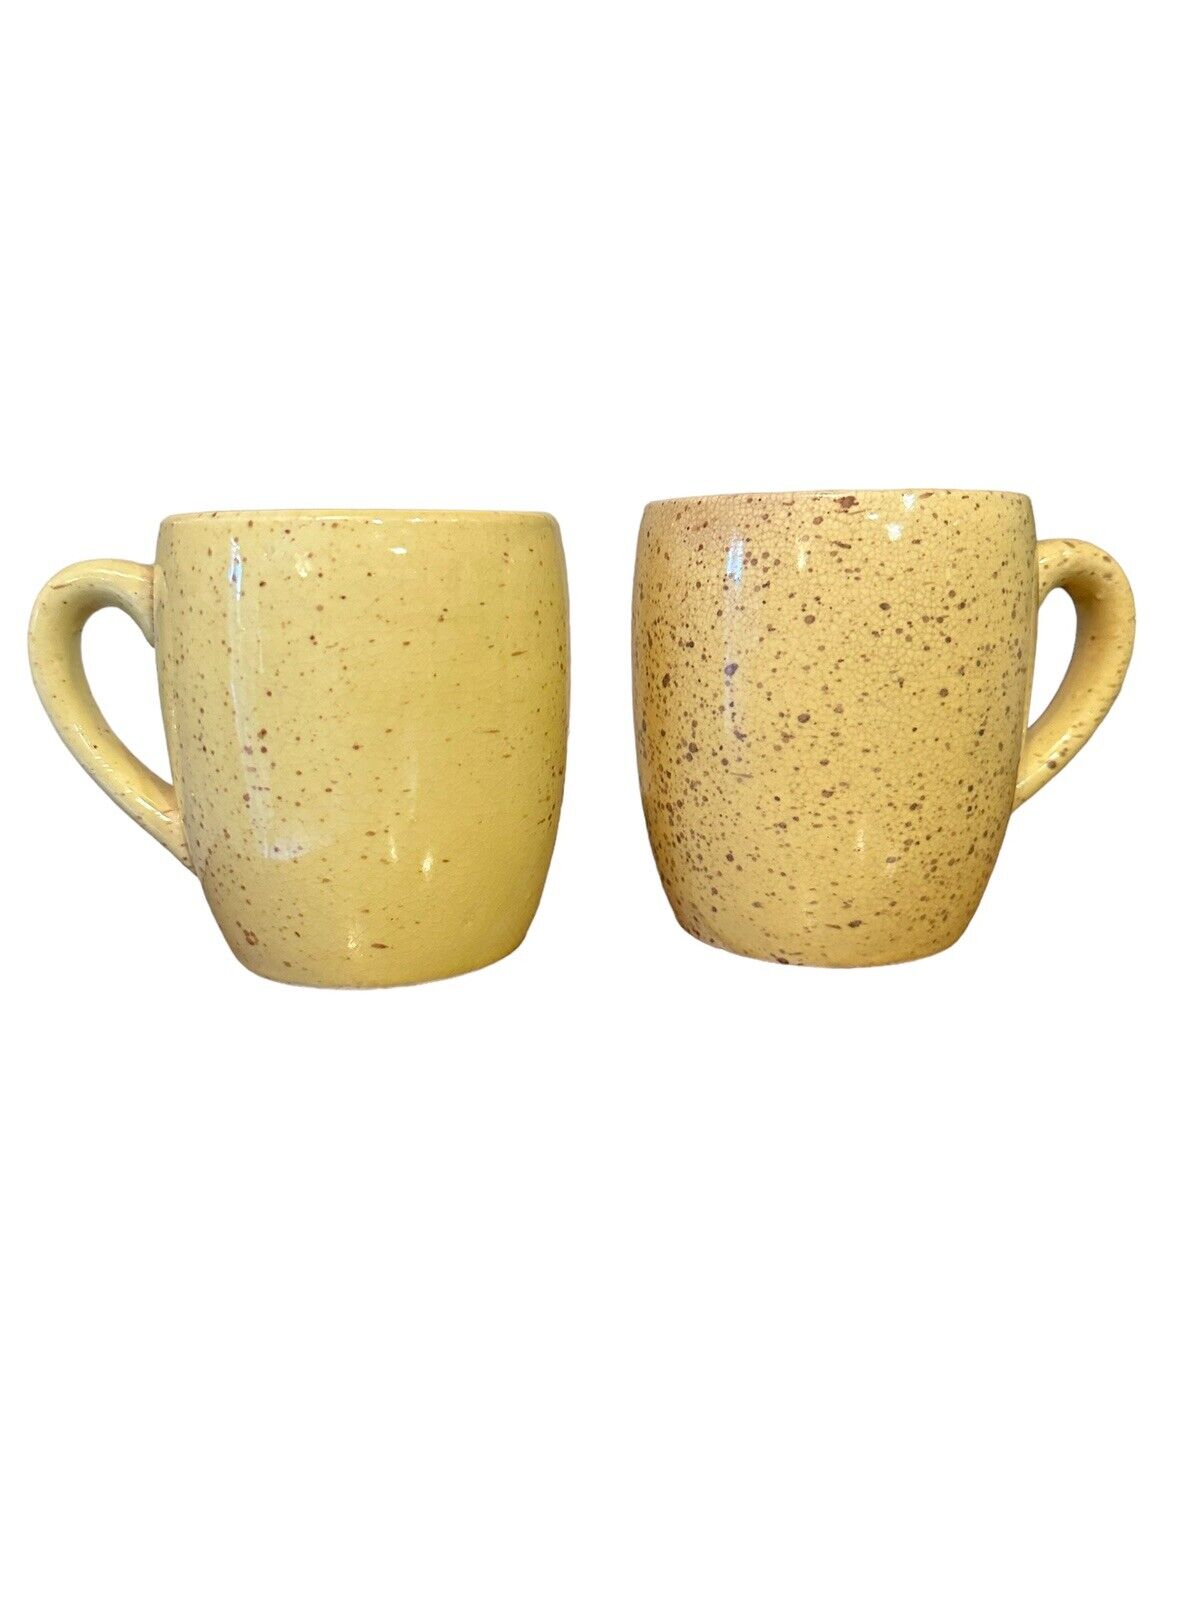 Pair of Vintage Speckled Stoneware Mugs Made in Japan yellow Speckled